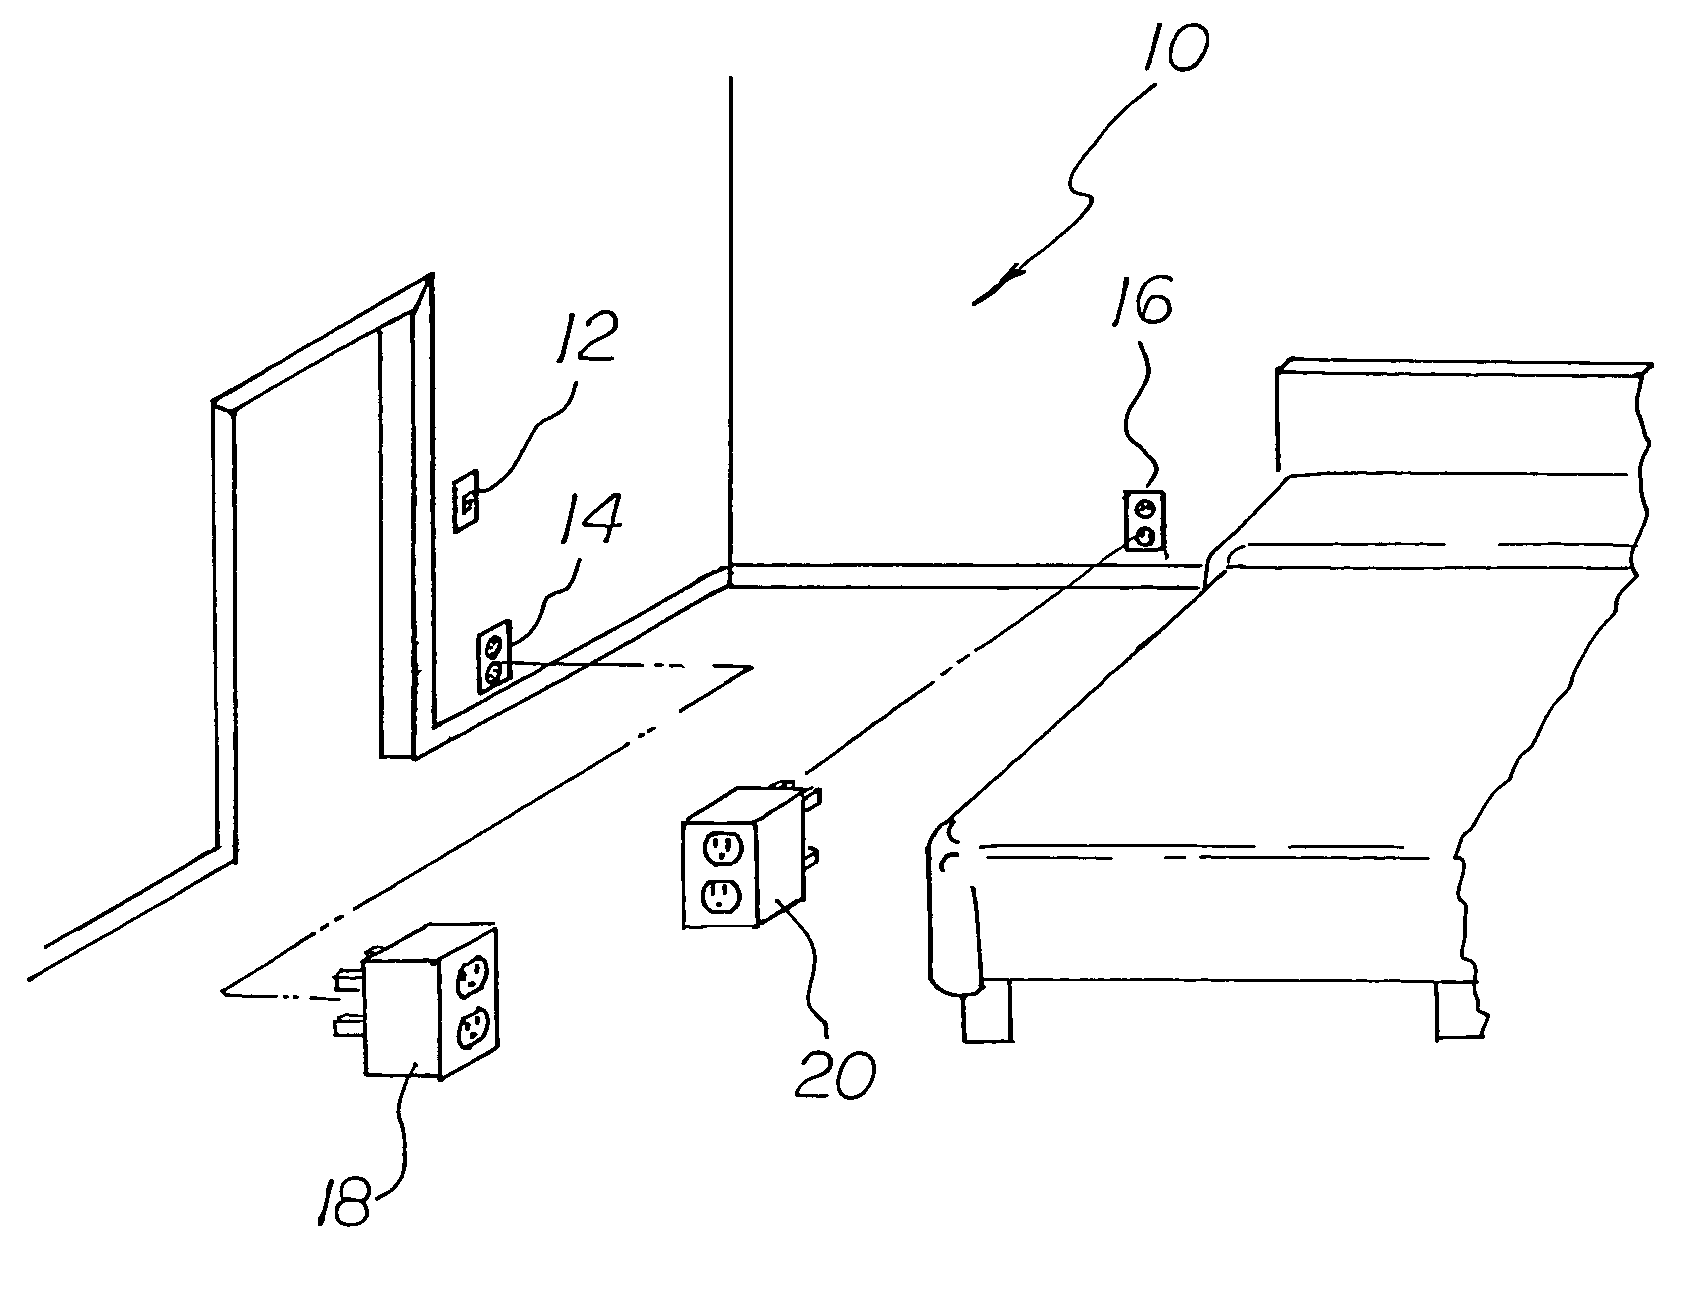 Apparatus for moving the effect of a wall switch from its switched power outlet to a non-switched outlet